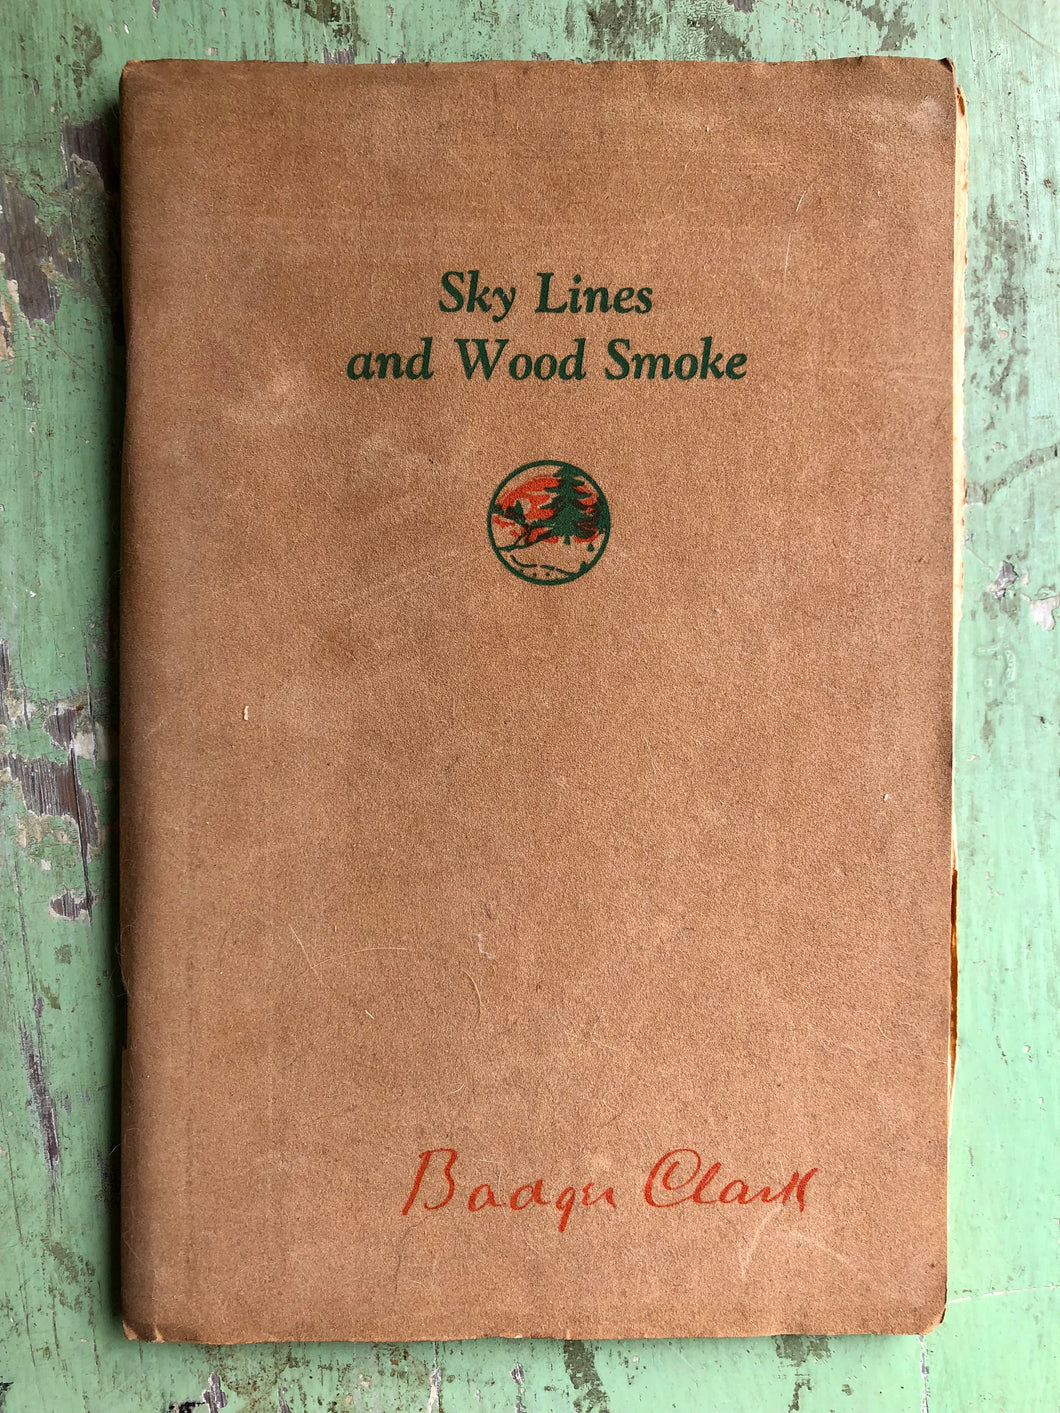 Sky Lines and Wood Smoke. by Badger Clark